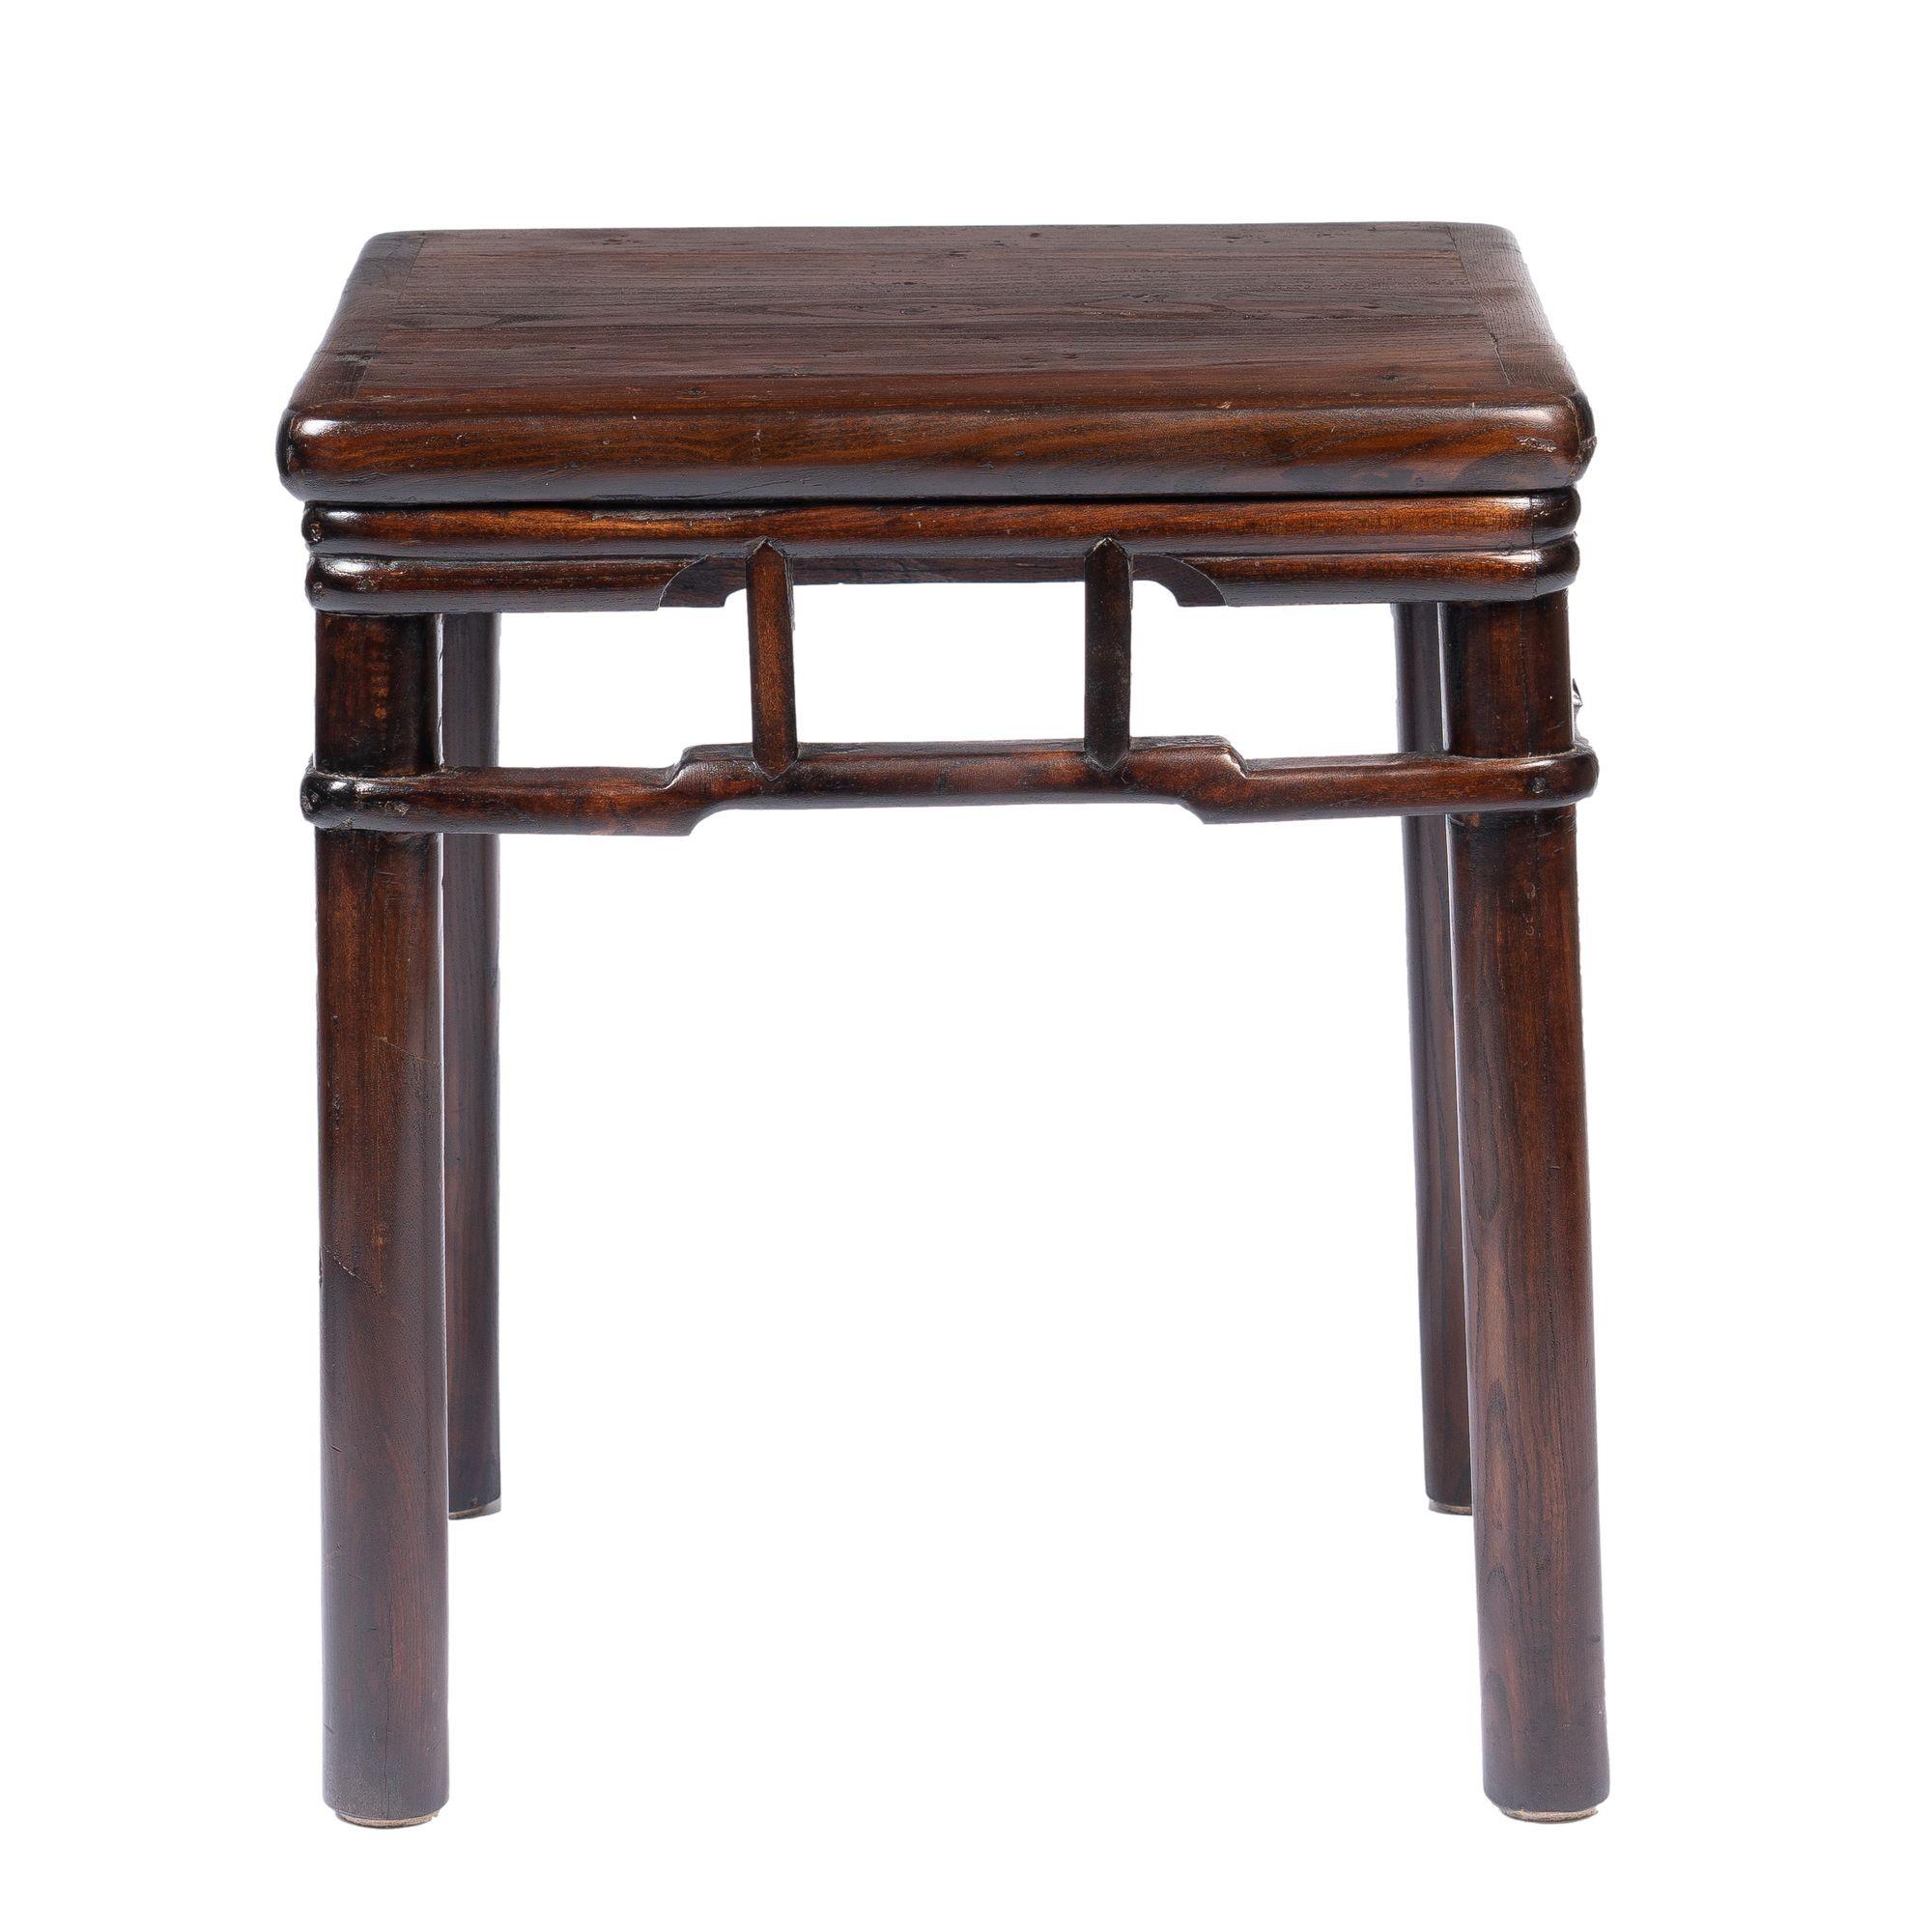 Pair of Chinese Elm Stools with Hump Back Rail, 1780-1820 For Sale 3